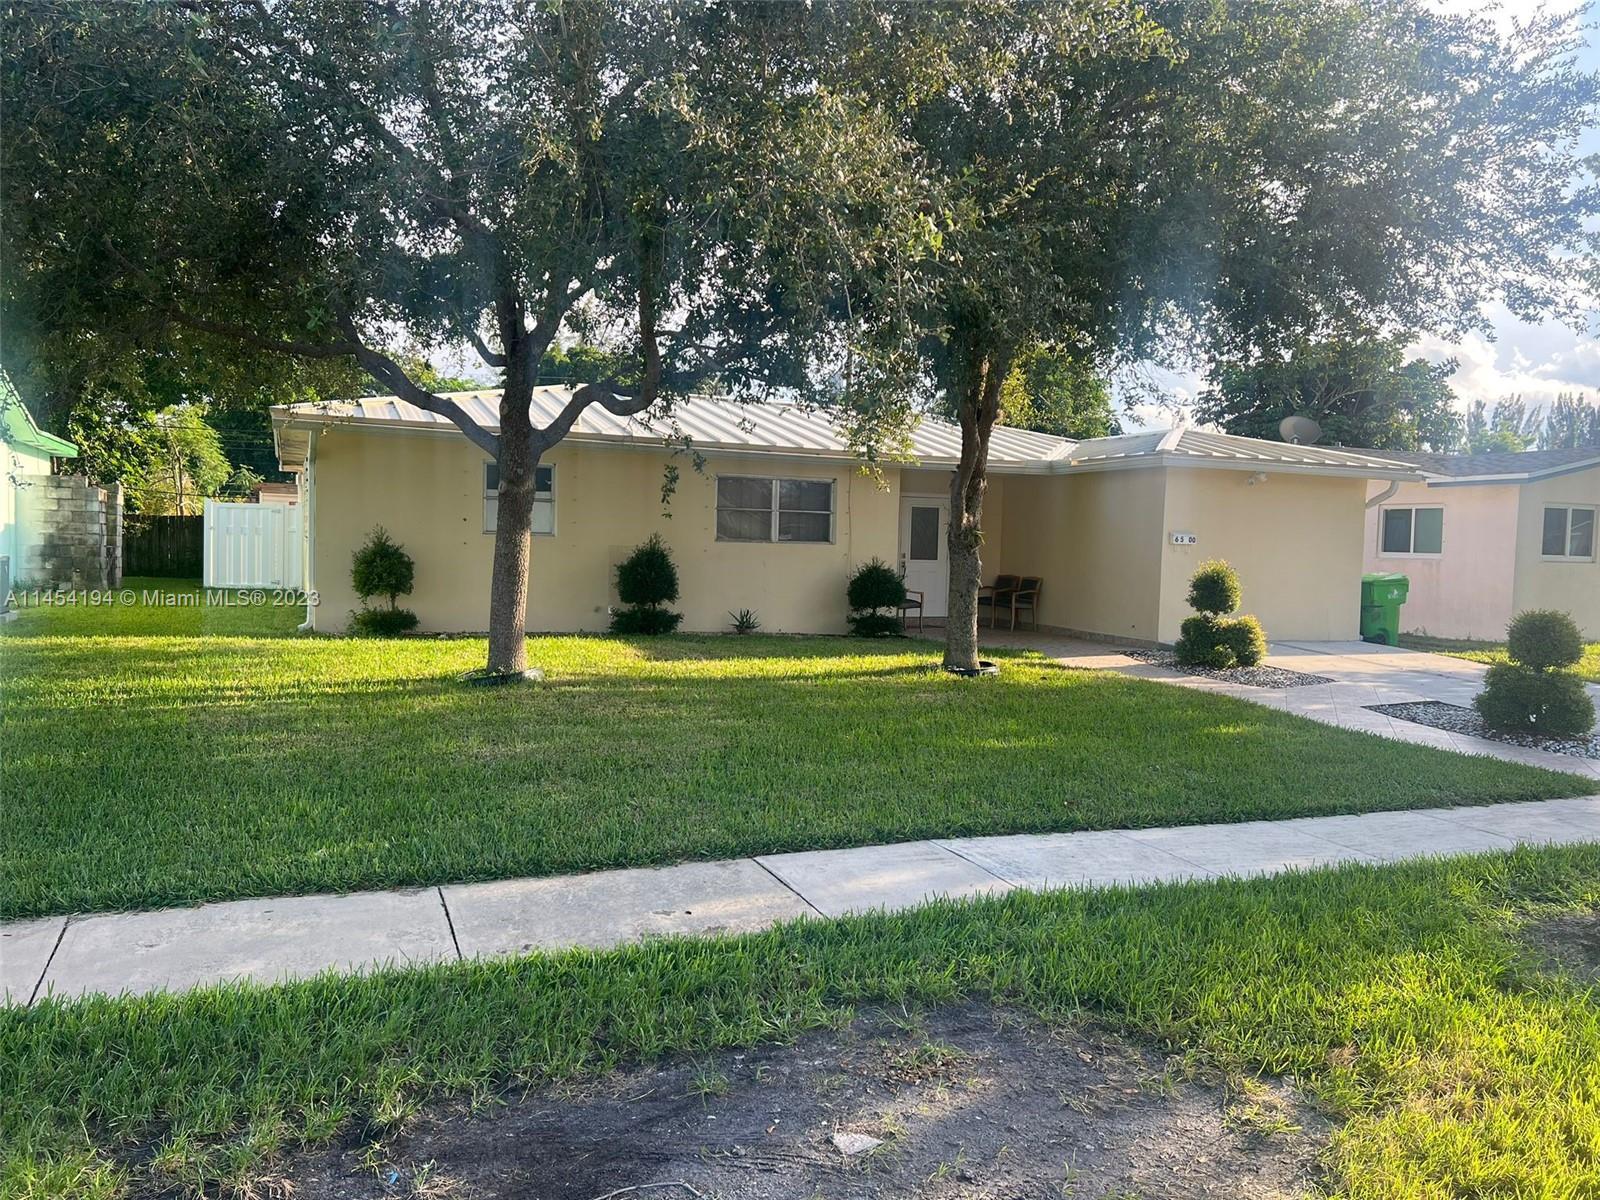 Photo of 6500 NW 21 Ct in Sunrise, FL